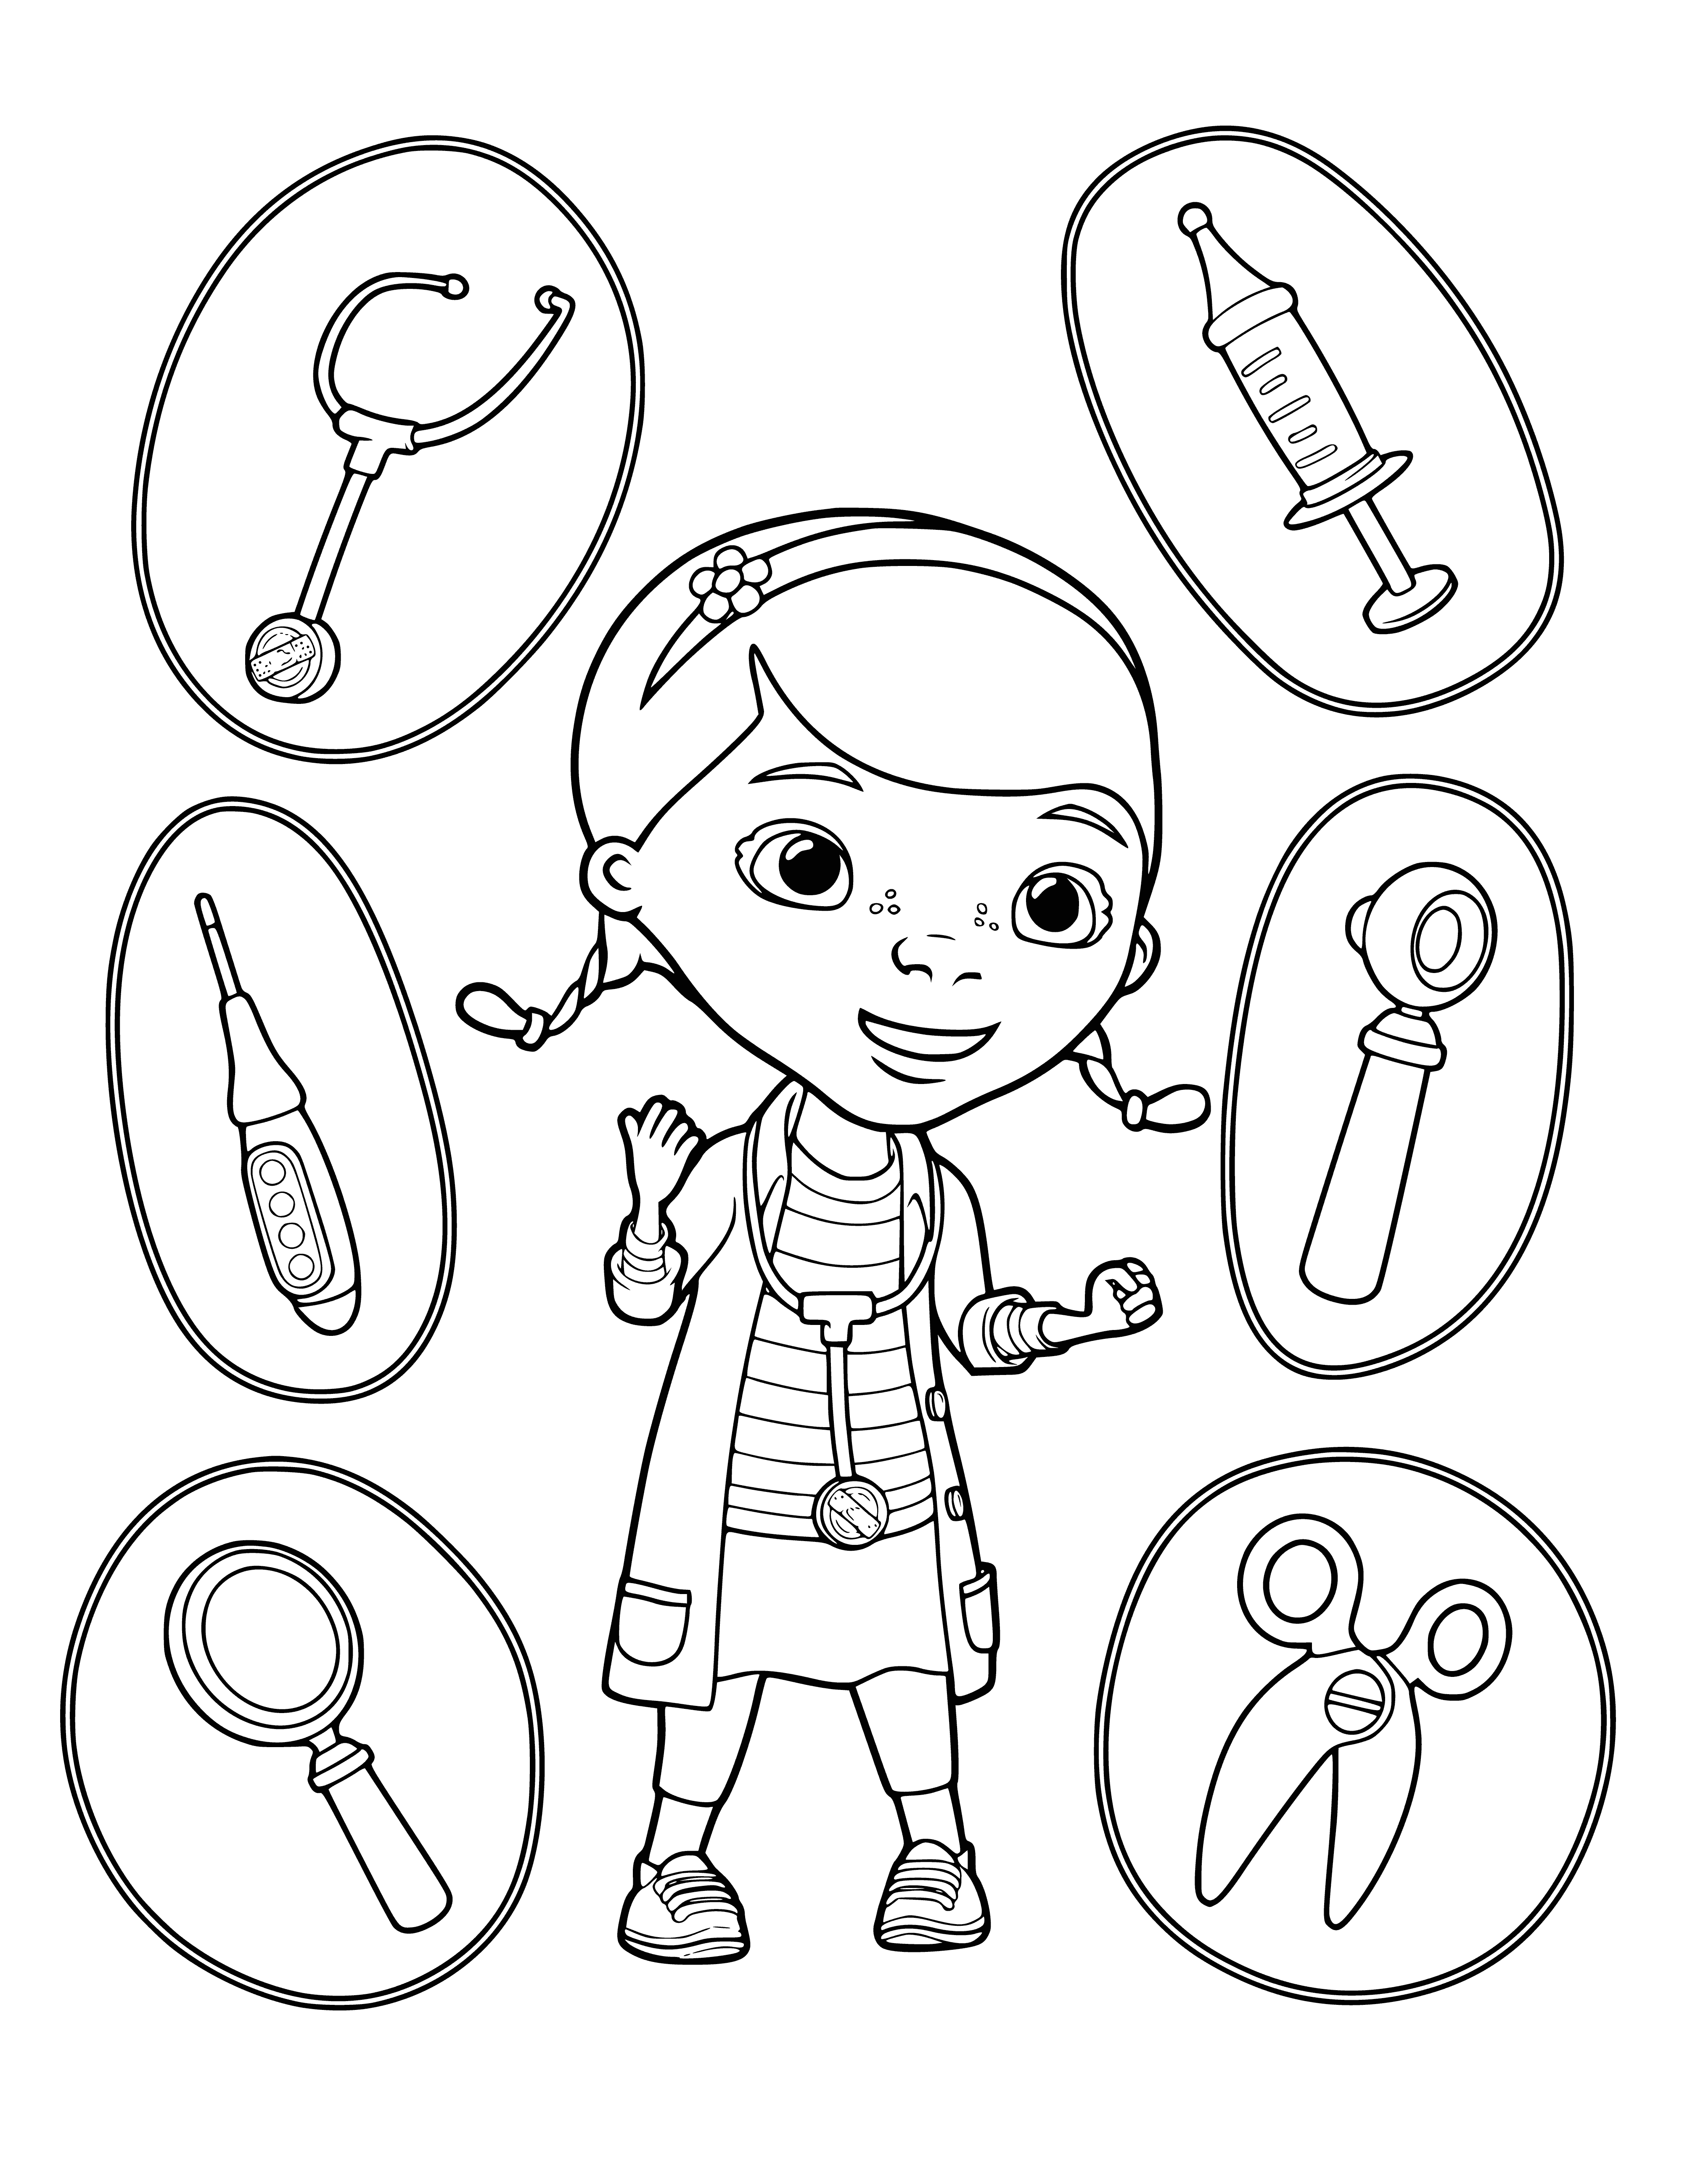 coloring page: Adorable Doc McStuffins Dotty plush w/ cuddly tools, mostly white w/ purple spots - perfect for the little doctor in your life!